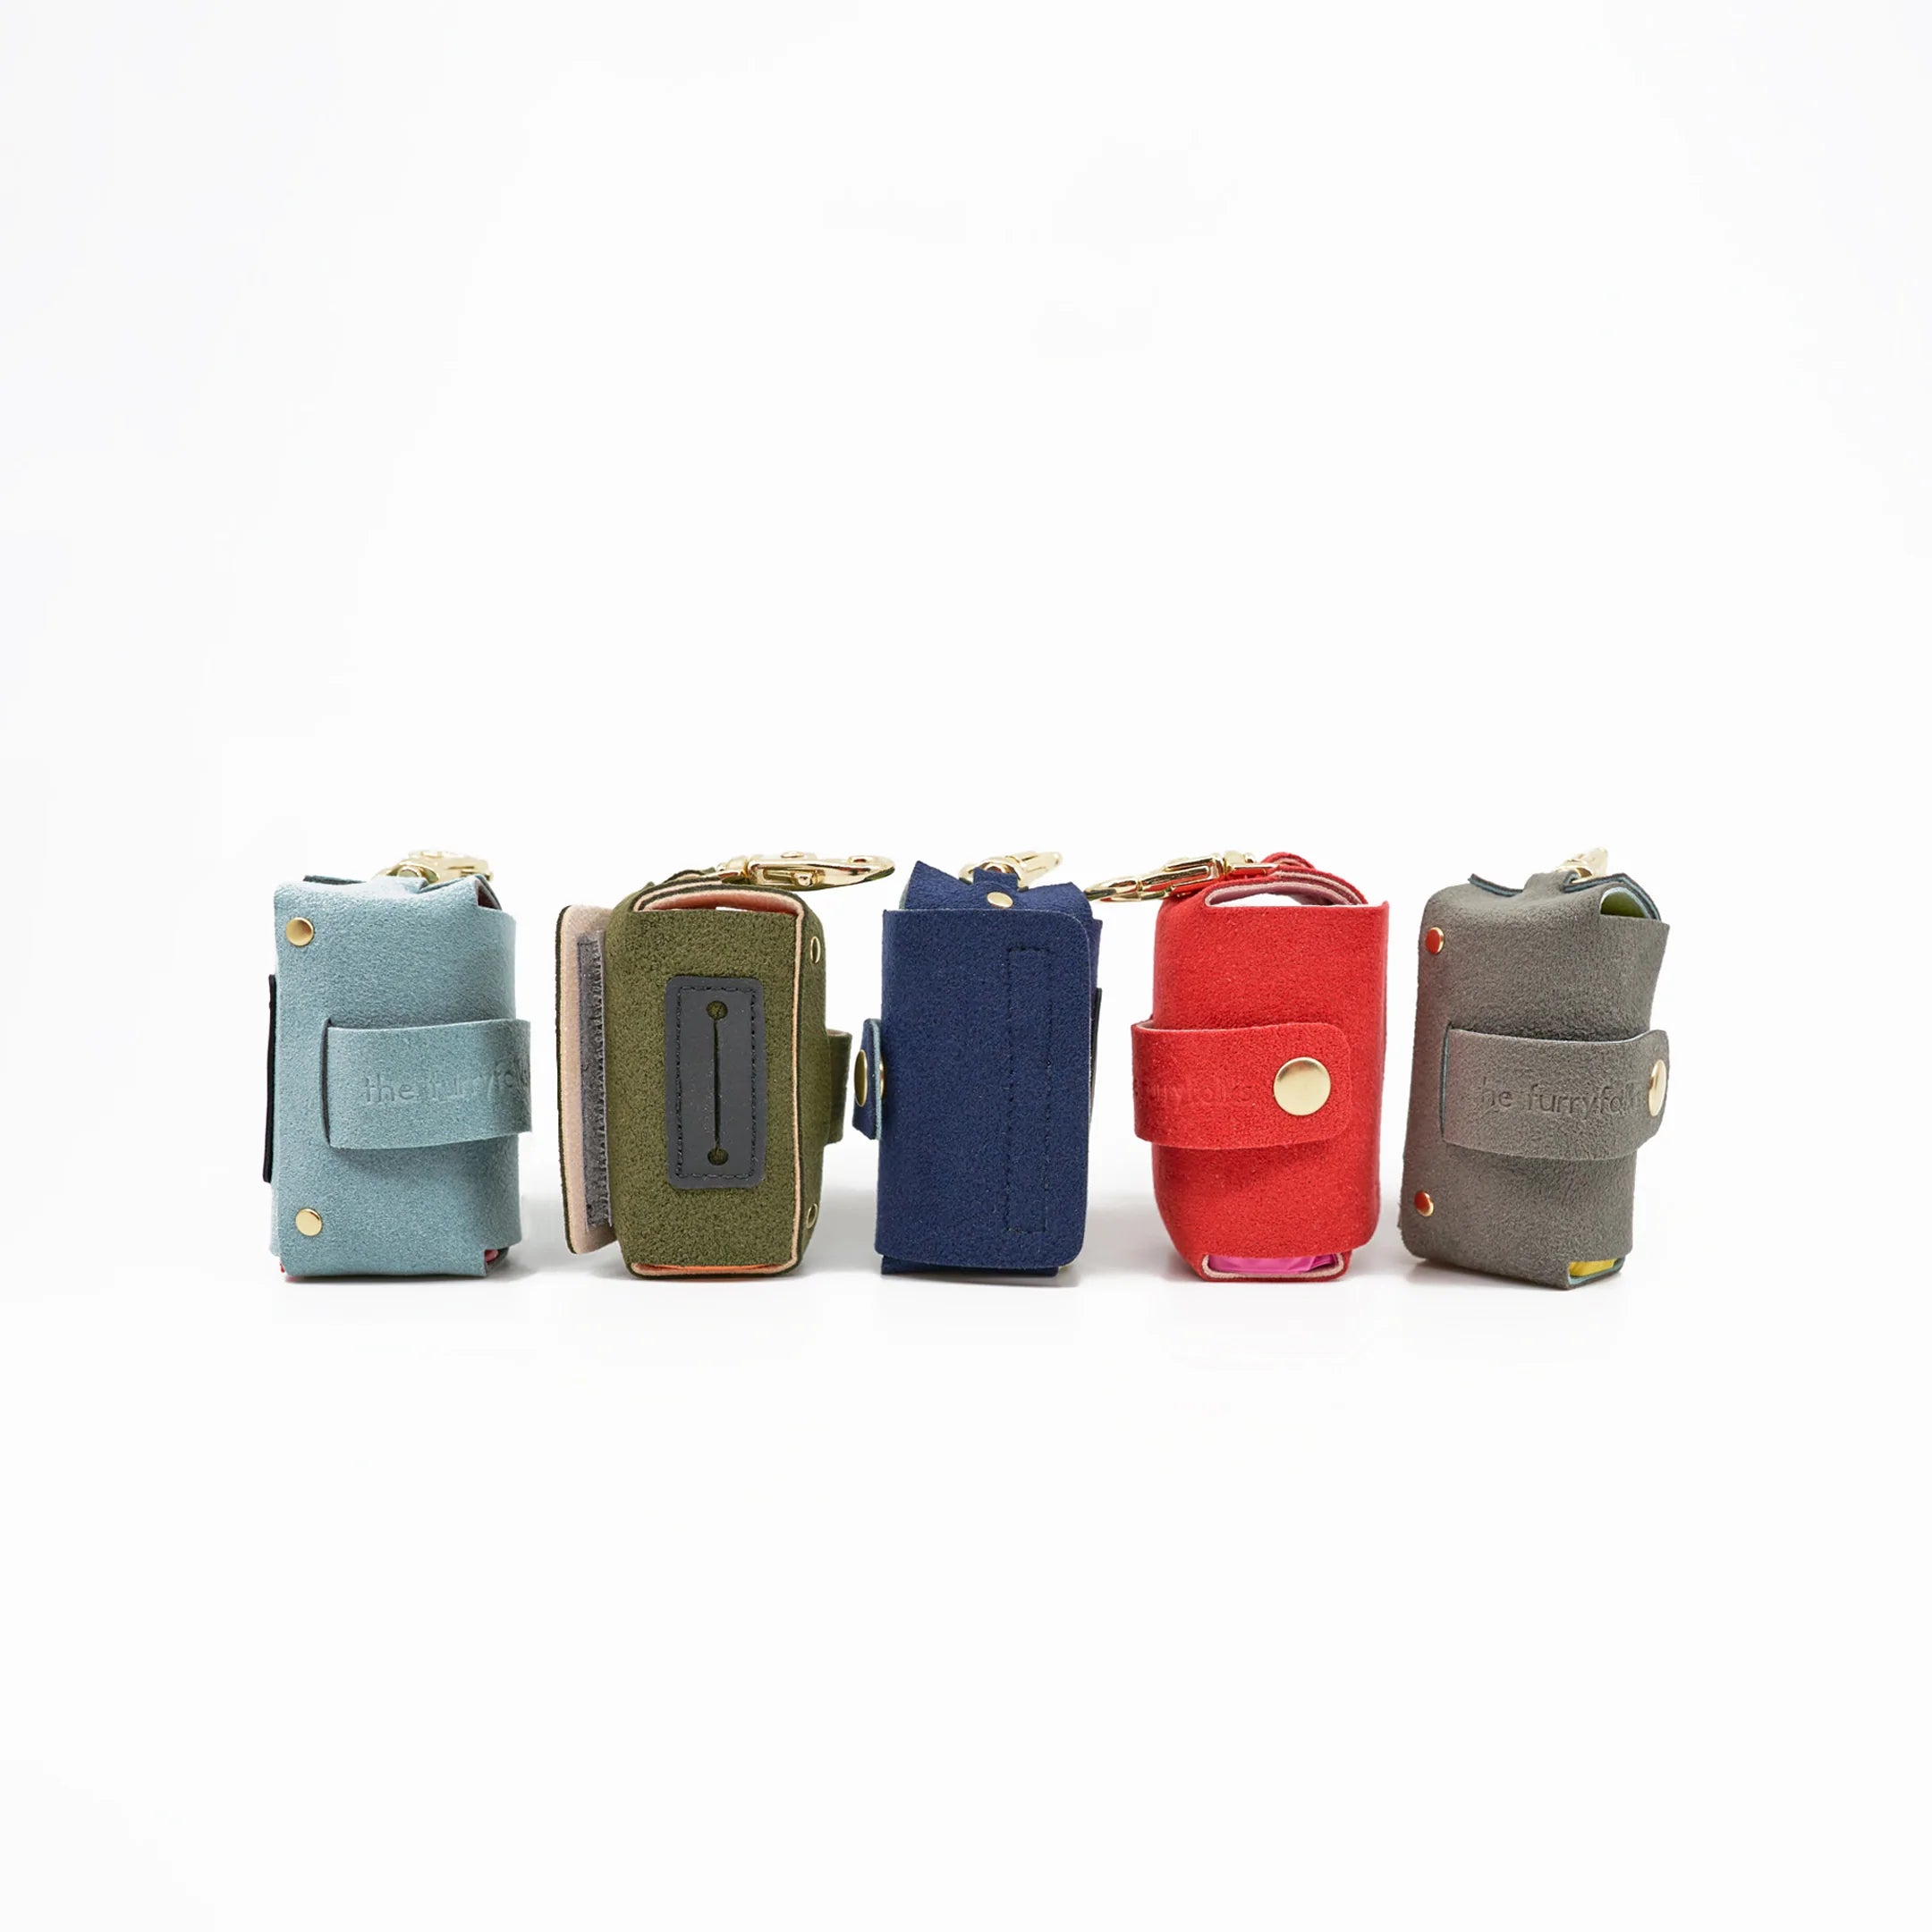 a lineup of five fabric dog poop bag holders in various colors. Each holder has a branded tag that reads "the furryfolks," likely indicating the manufacturer or brand of the product. These holders appear to be designed to attach to a dog's leash, providing a convenient and stylish way to carry poop bags while walking a dog. The variety of colors suggests that they are available to suit different tastes and preferences. 